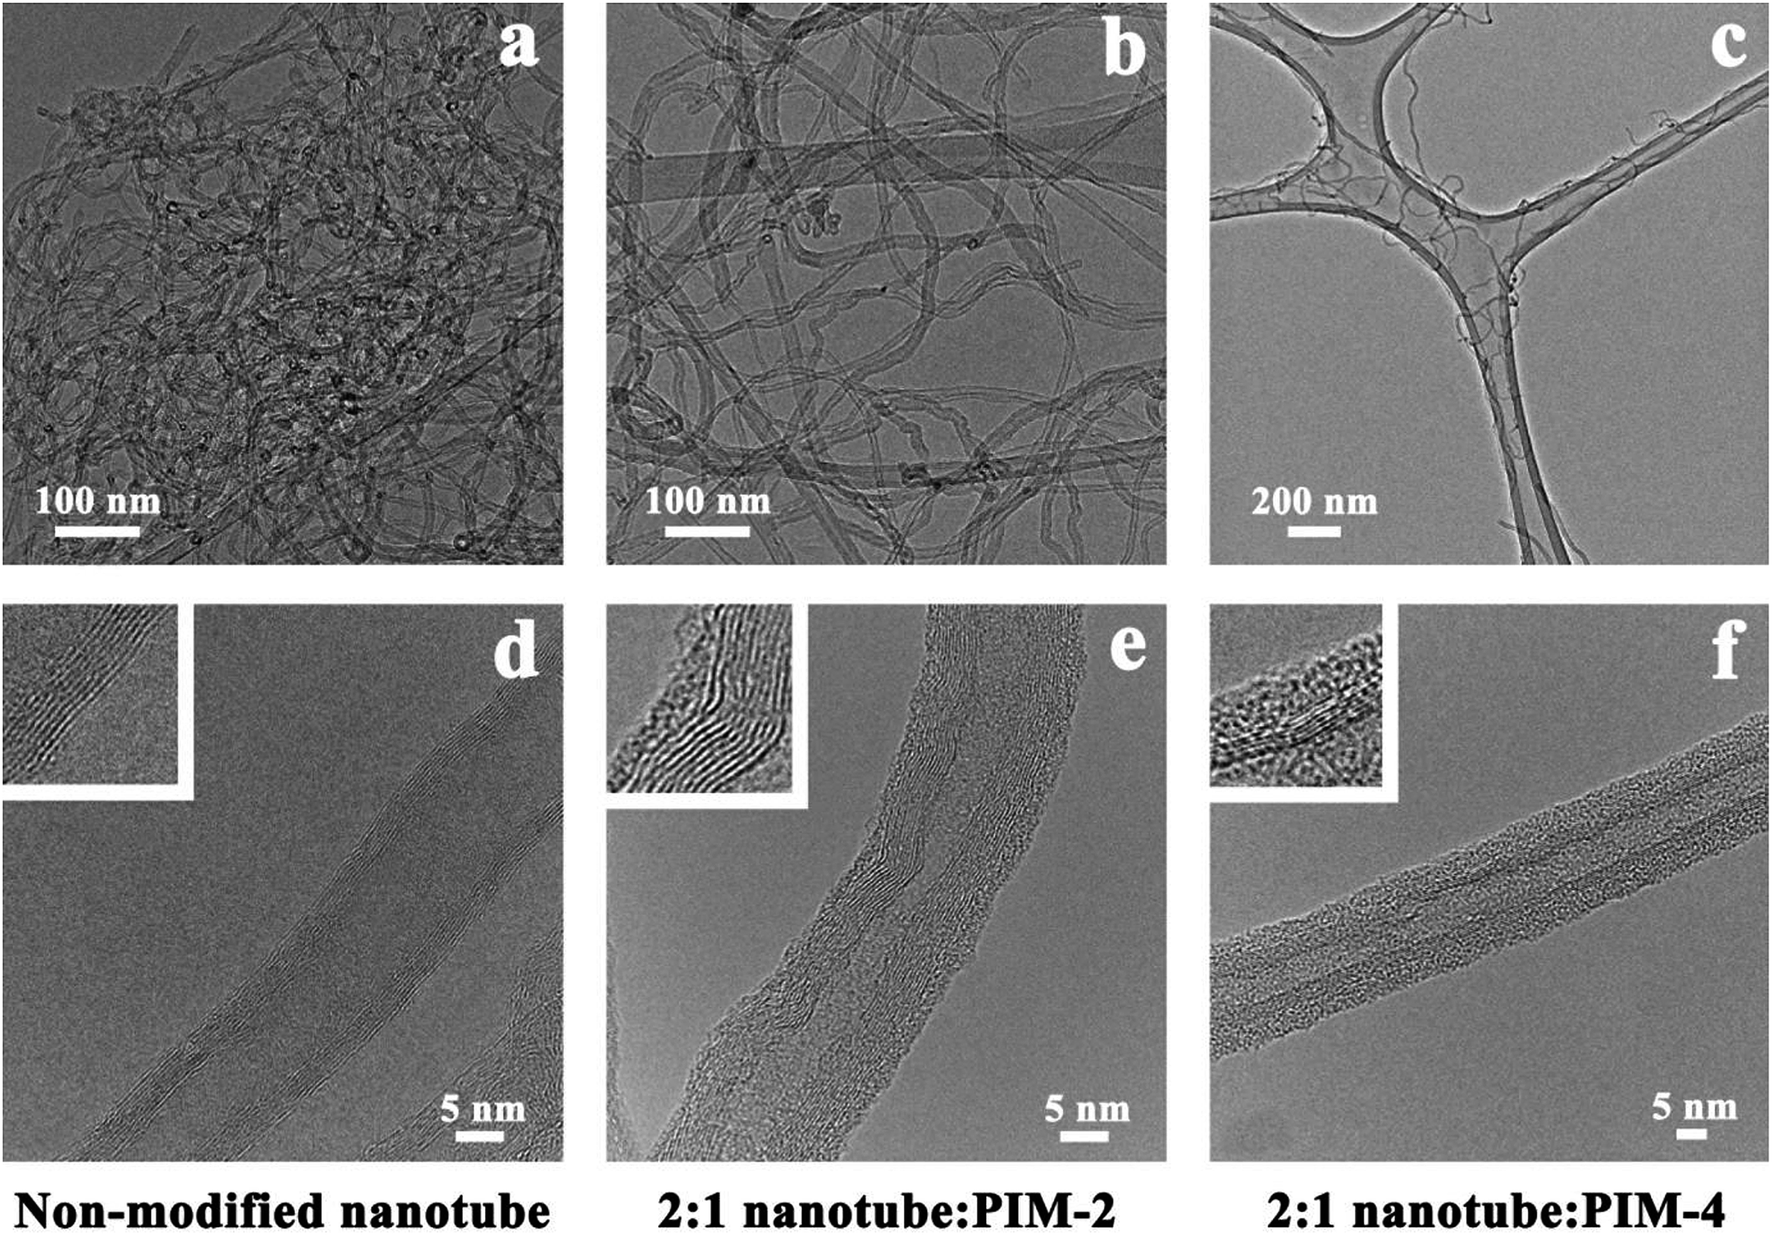 A review of the interfacial characteristics of polymer